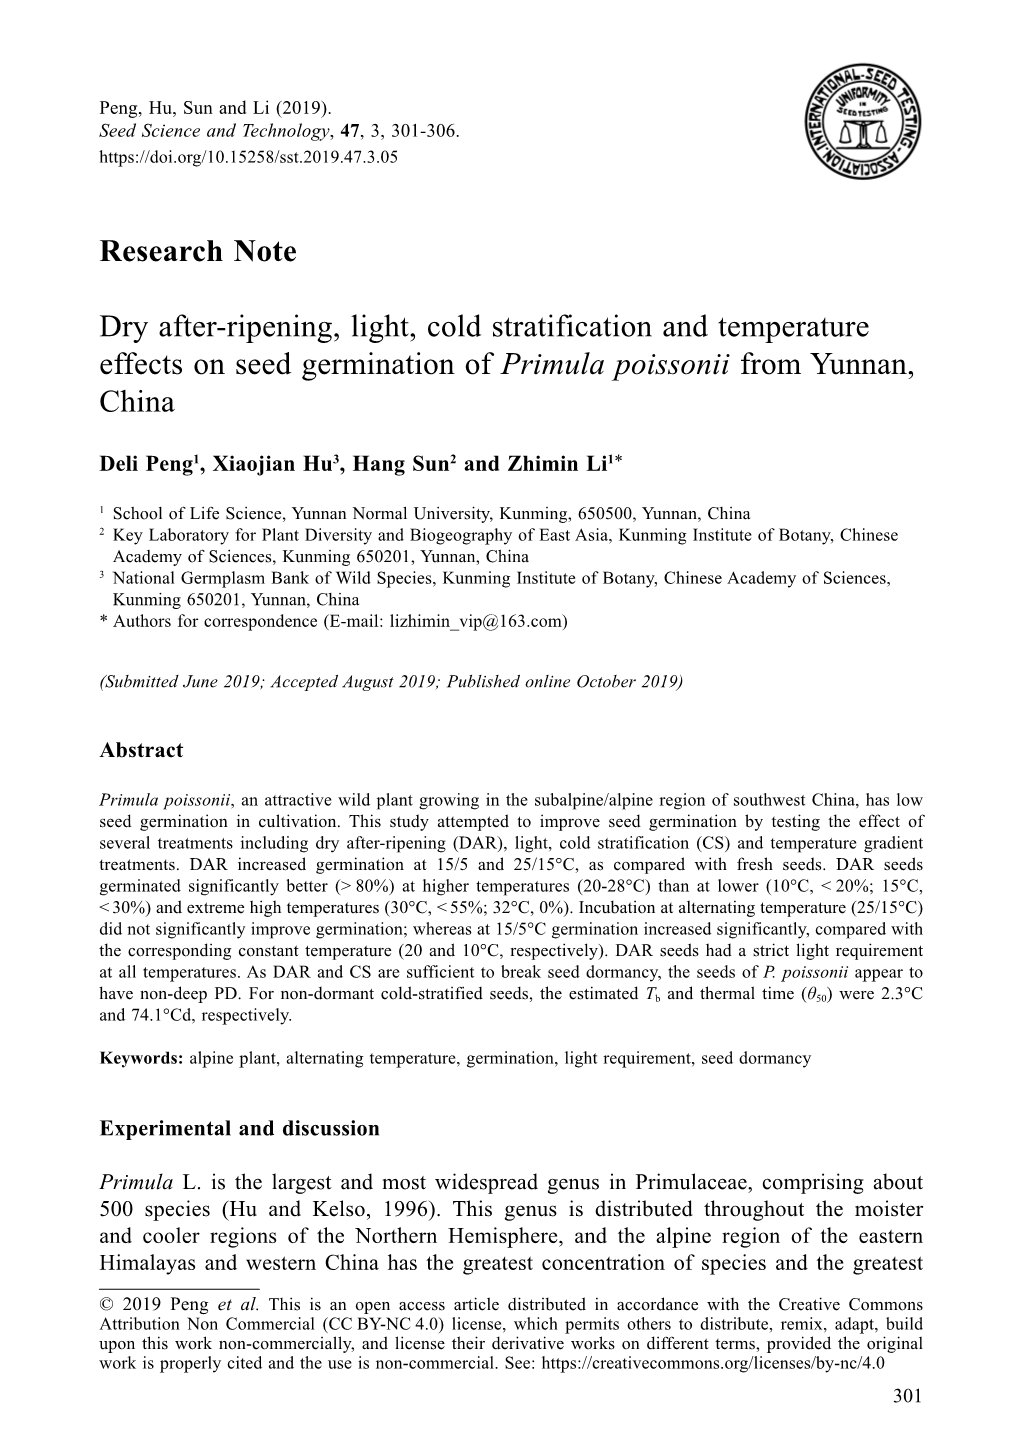 Dry After-Ripening, Light, Cold Stratification and Temperature Effects on Seed Germination of Primula Poissonii from Yunnan, China